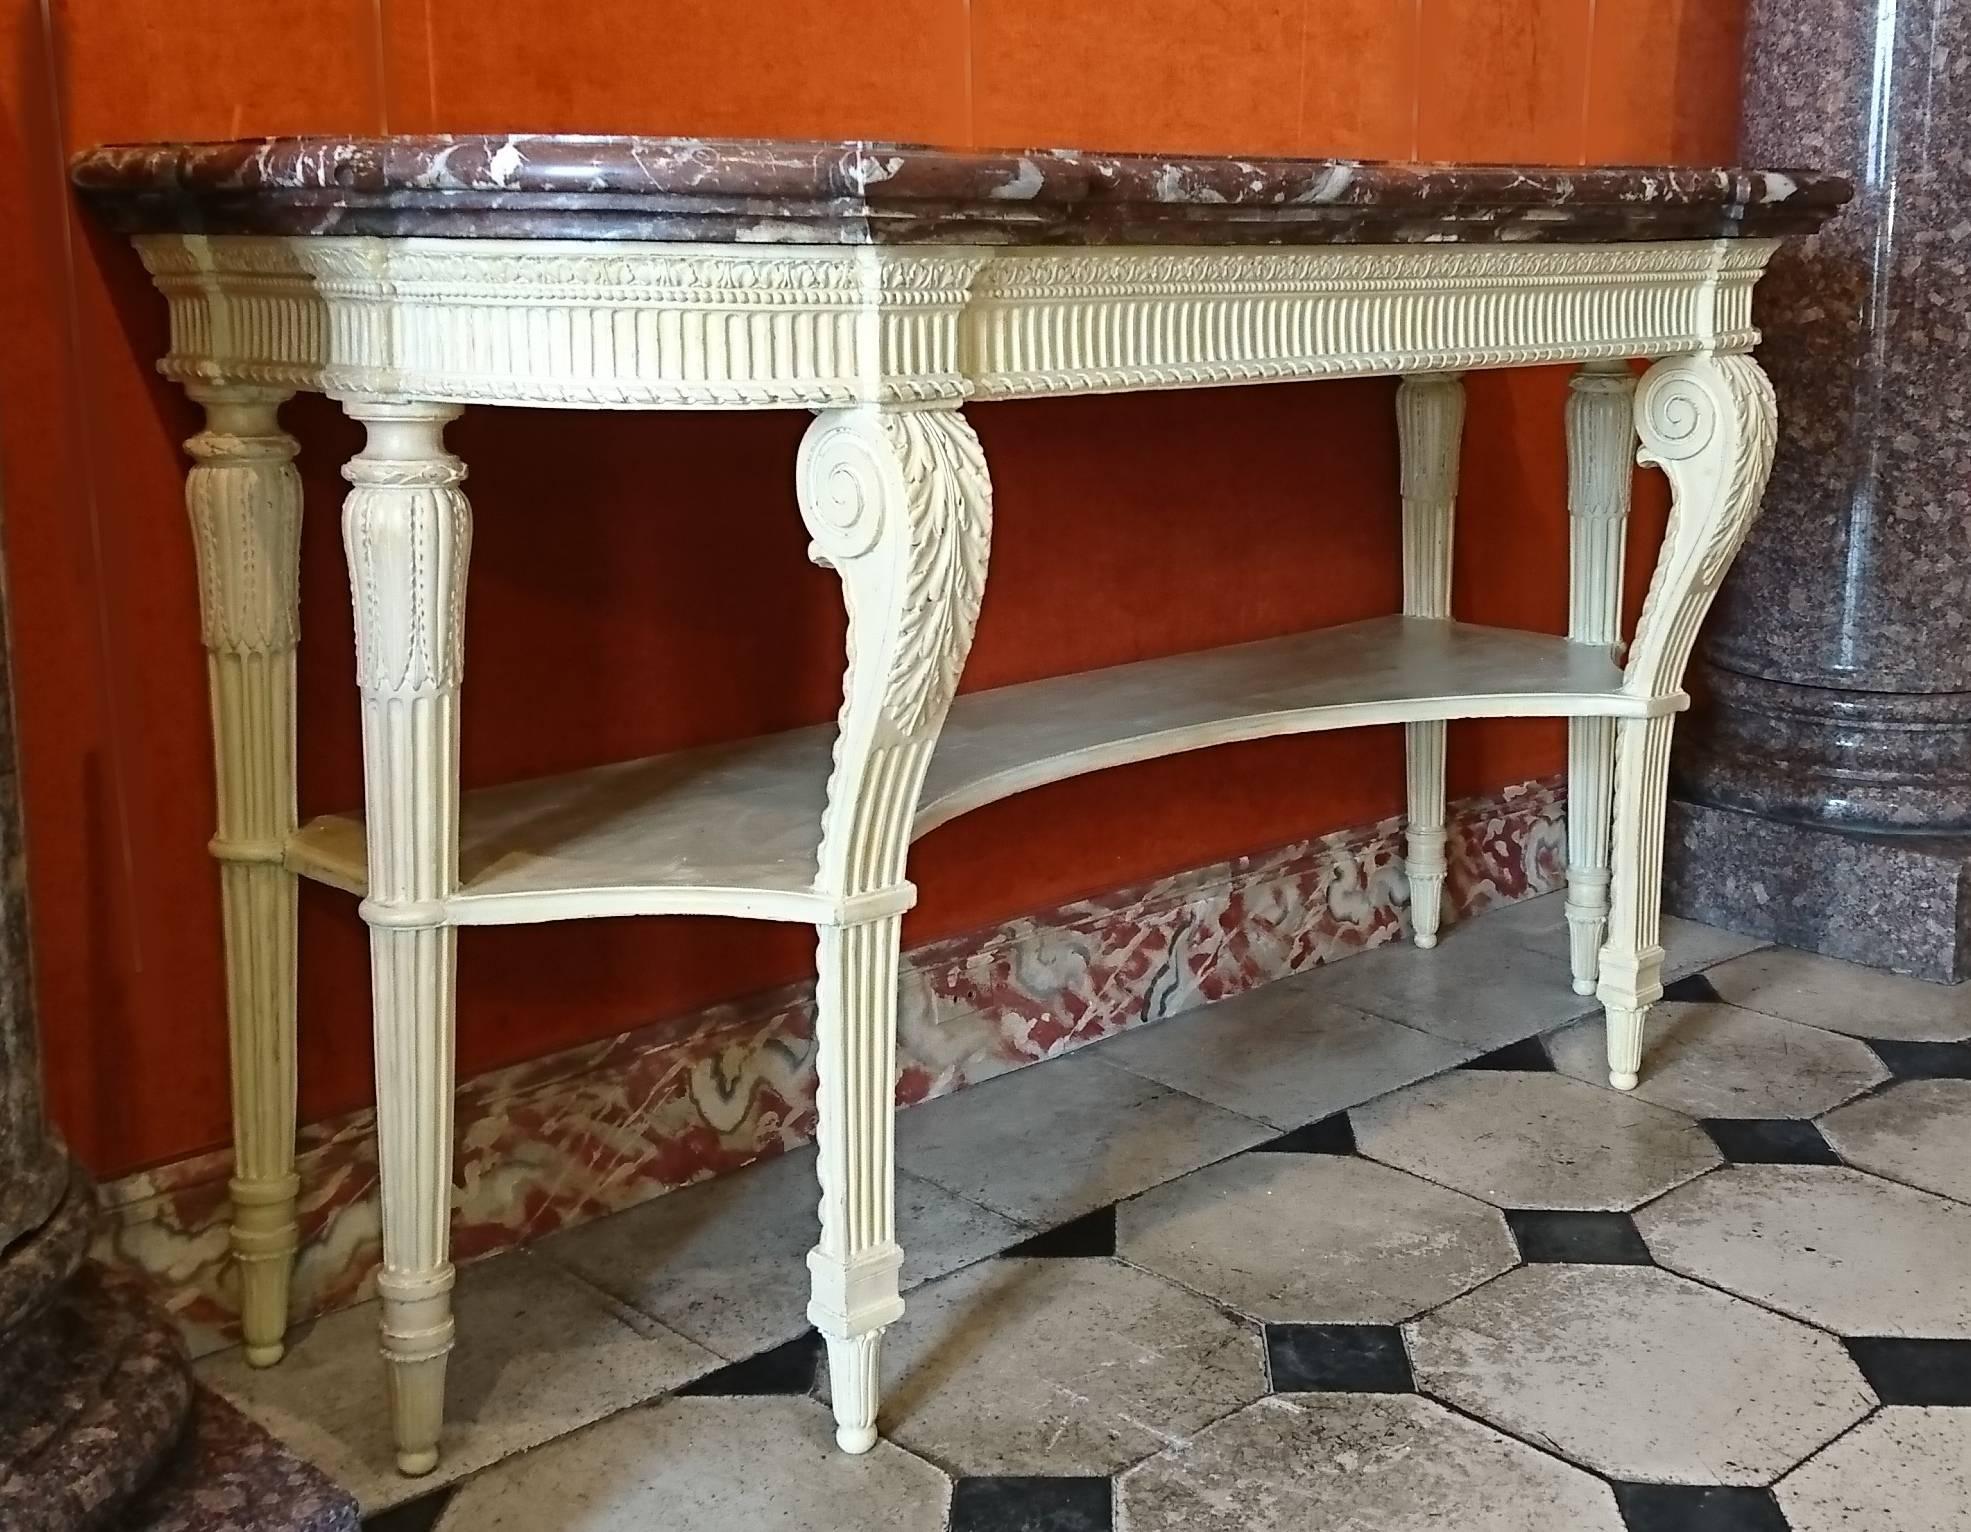 A fine French Louis XVI period carved and painted wood console table with six legs, the two front one with scrolls, attributed to Georges Jacob, the Languedoc red marble top original, circa 1775-1780.